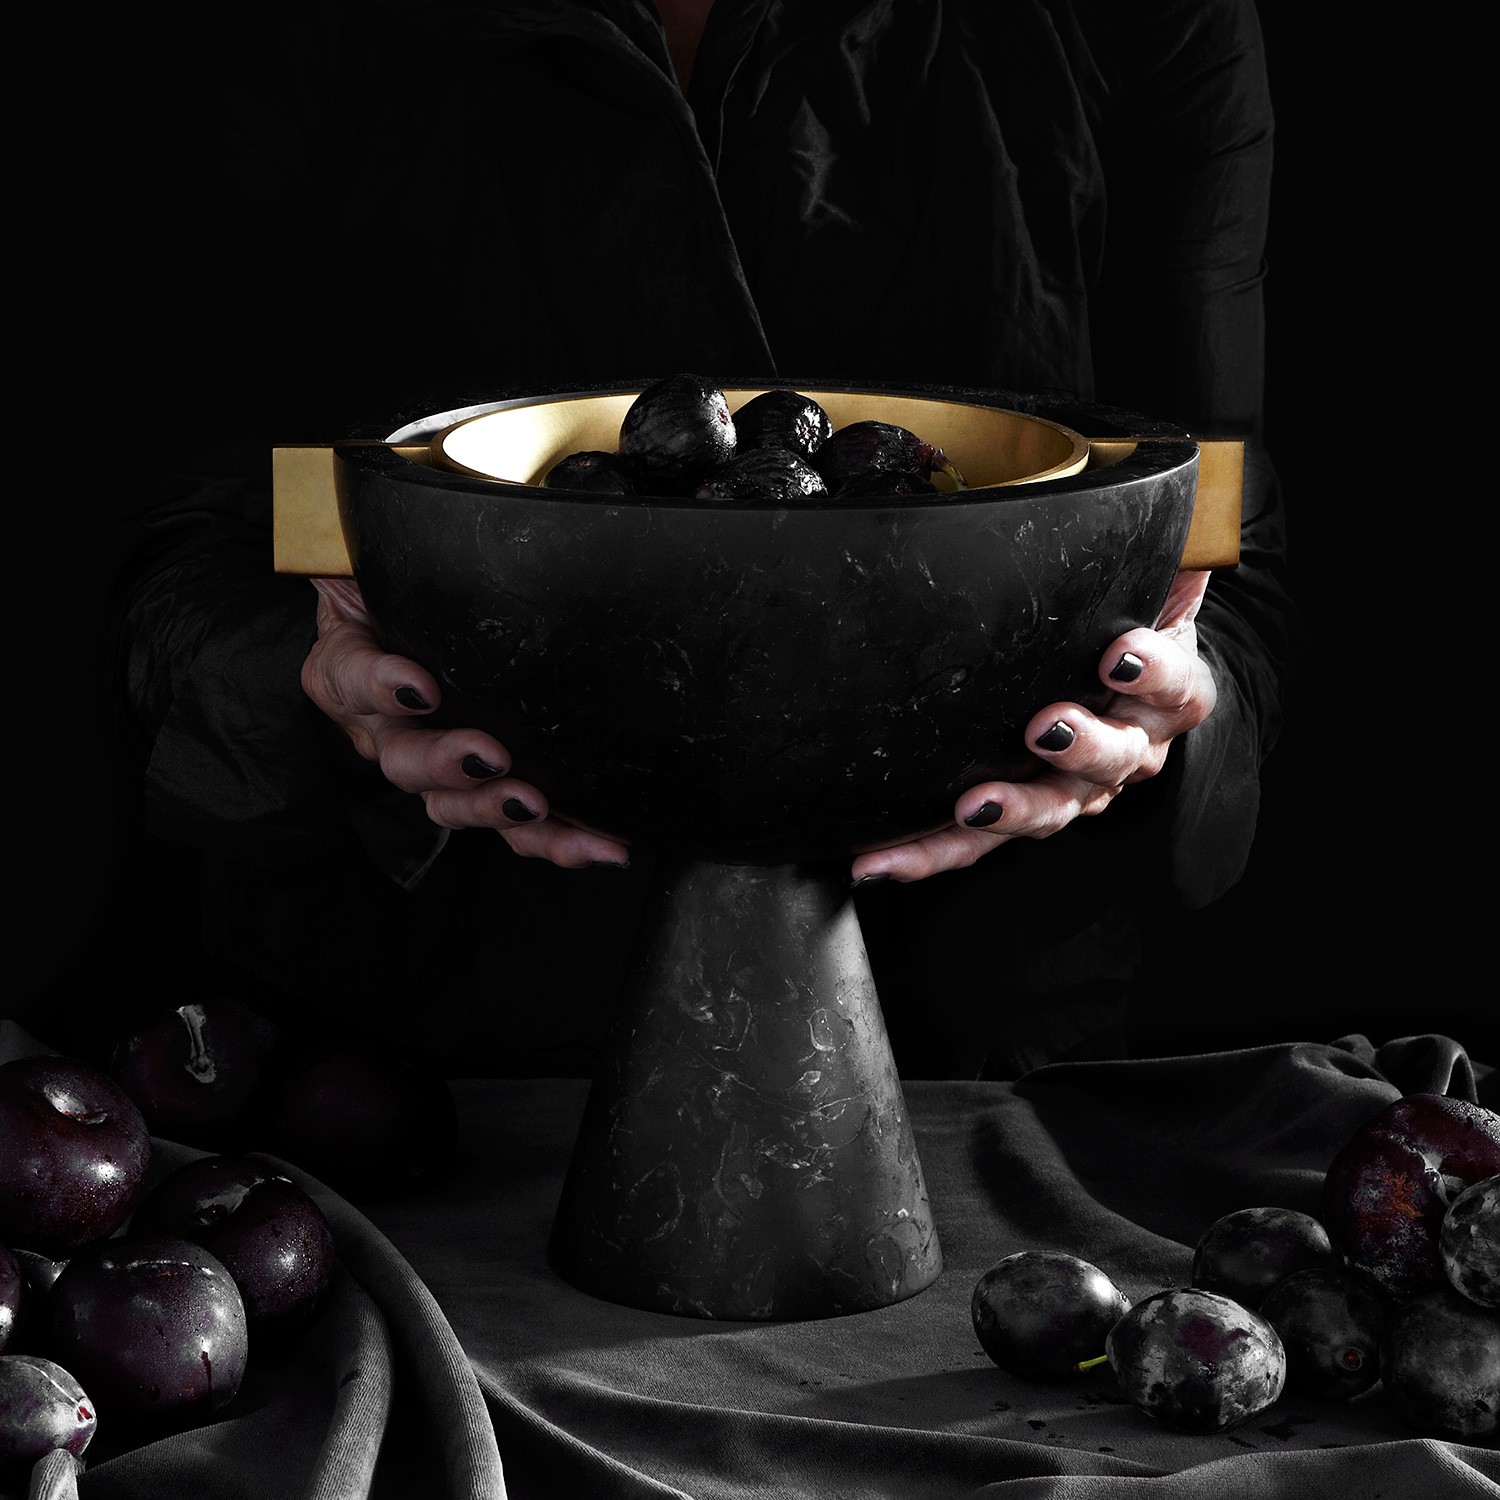 a person holding a bowl of fruit in their hands